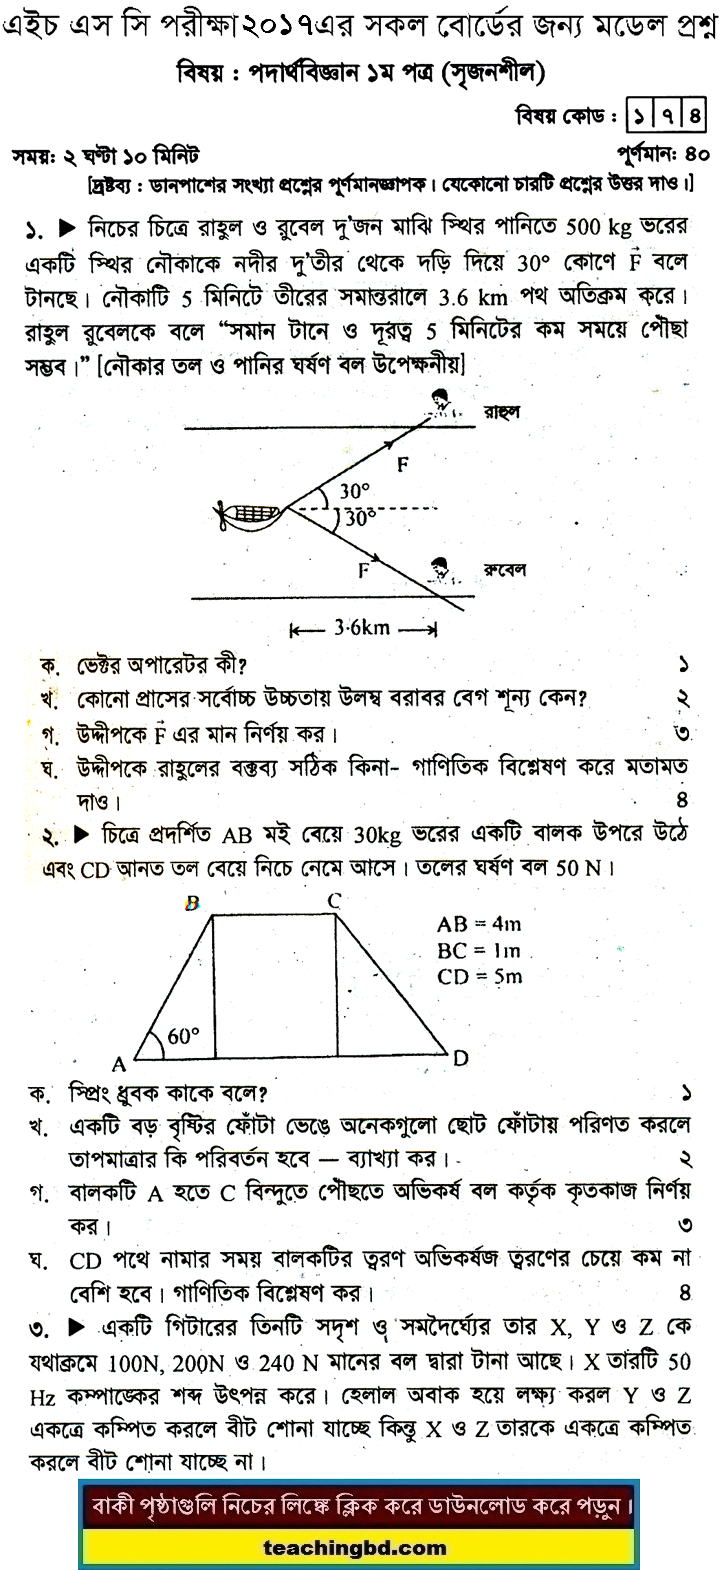 Physics 1 Suggestion and Question Patterns of HSC Examination 2017-7